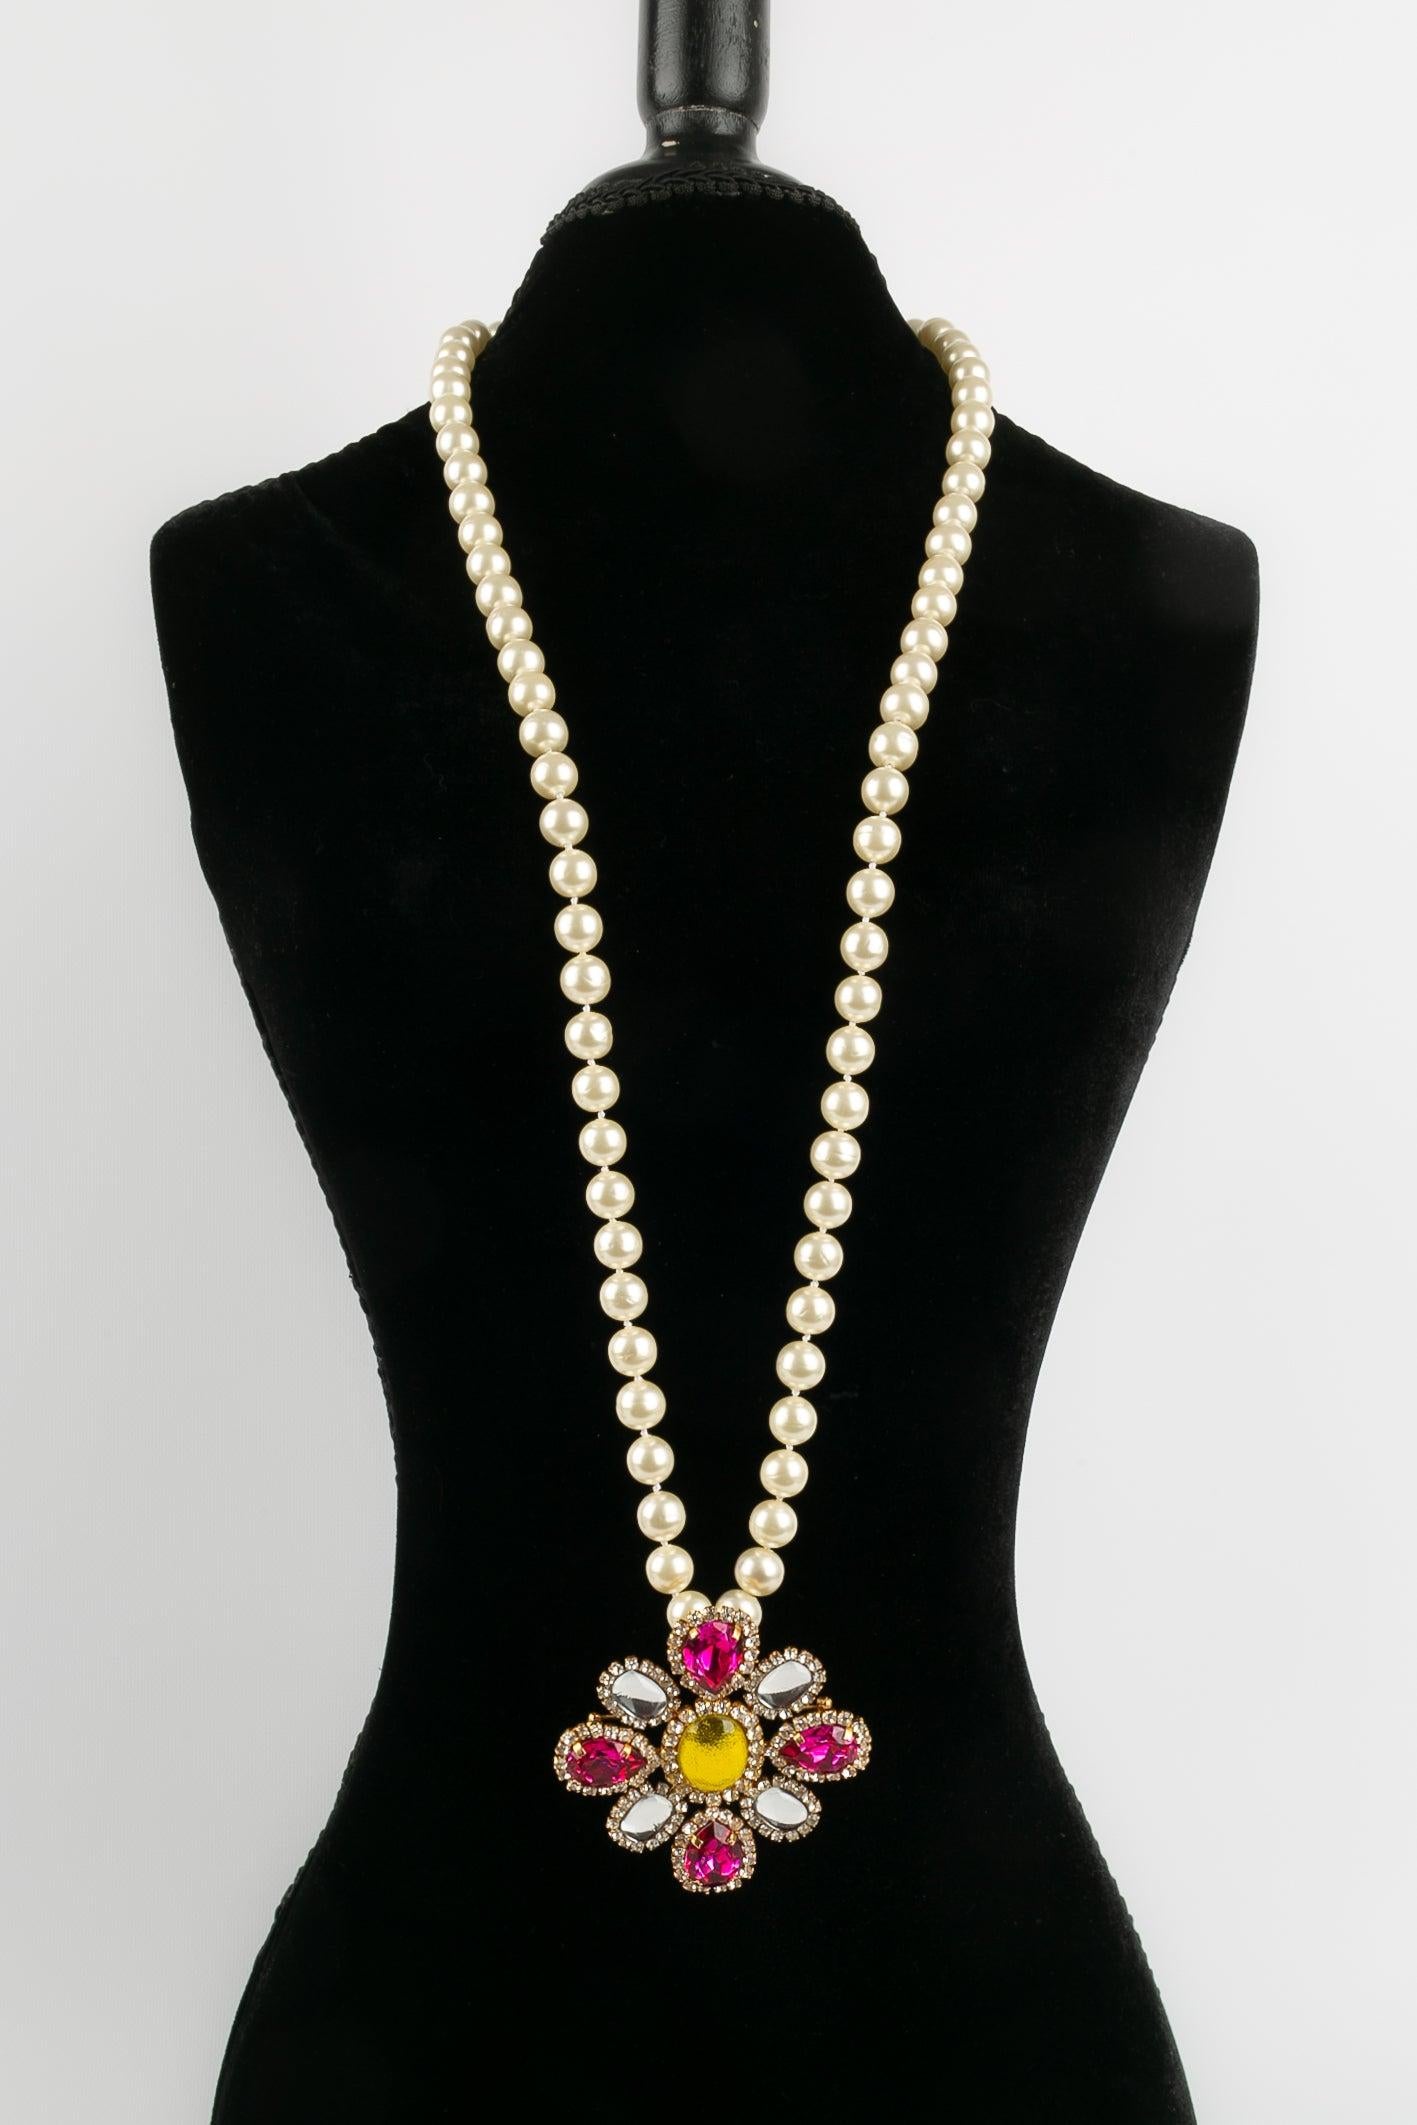 Chanel -(Made in France) Necklace of pearls decorated with a brooch pendant in gold metal and rhinestones. Spring/Summer 1995 collection.

Additional information: 

Dimensions: 
Length : 107 cm

Condition: 
Very good condition
Seller Ref number: CB73